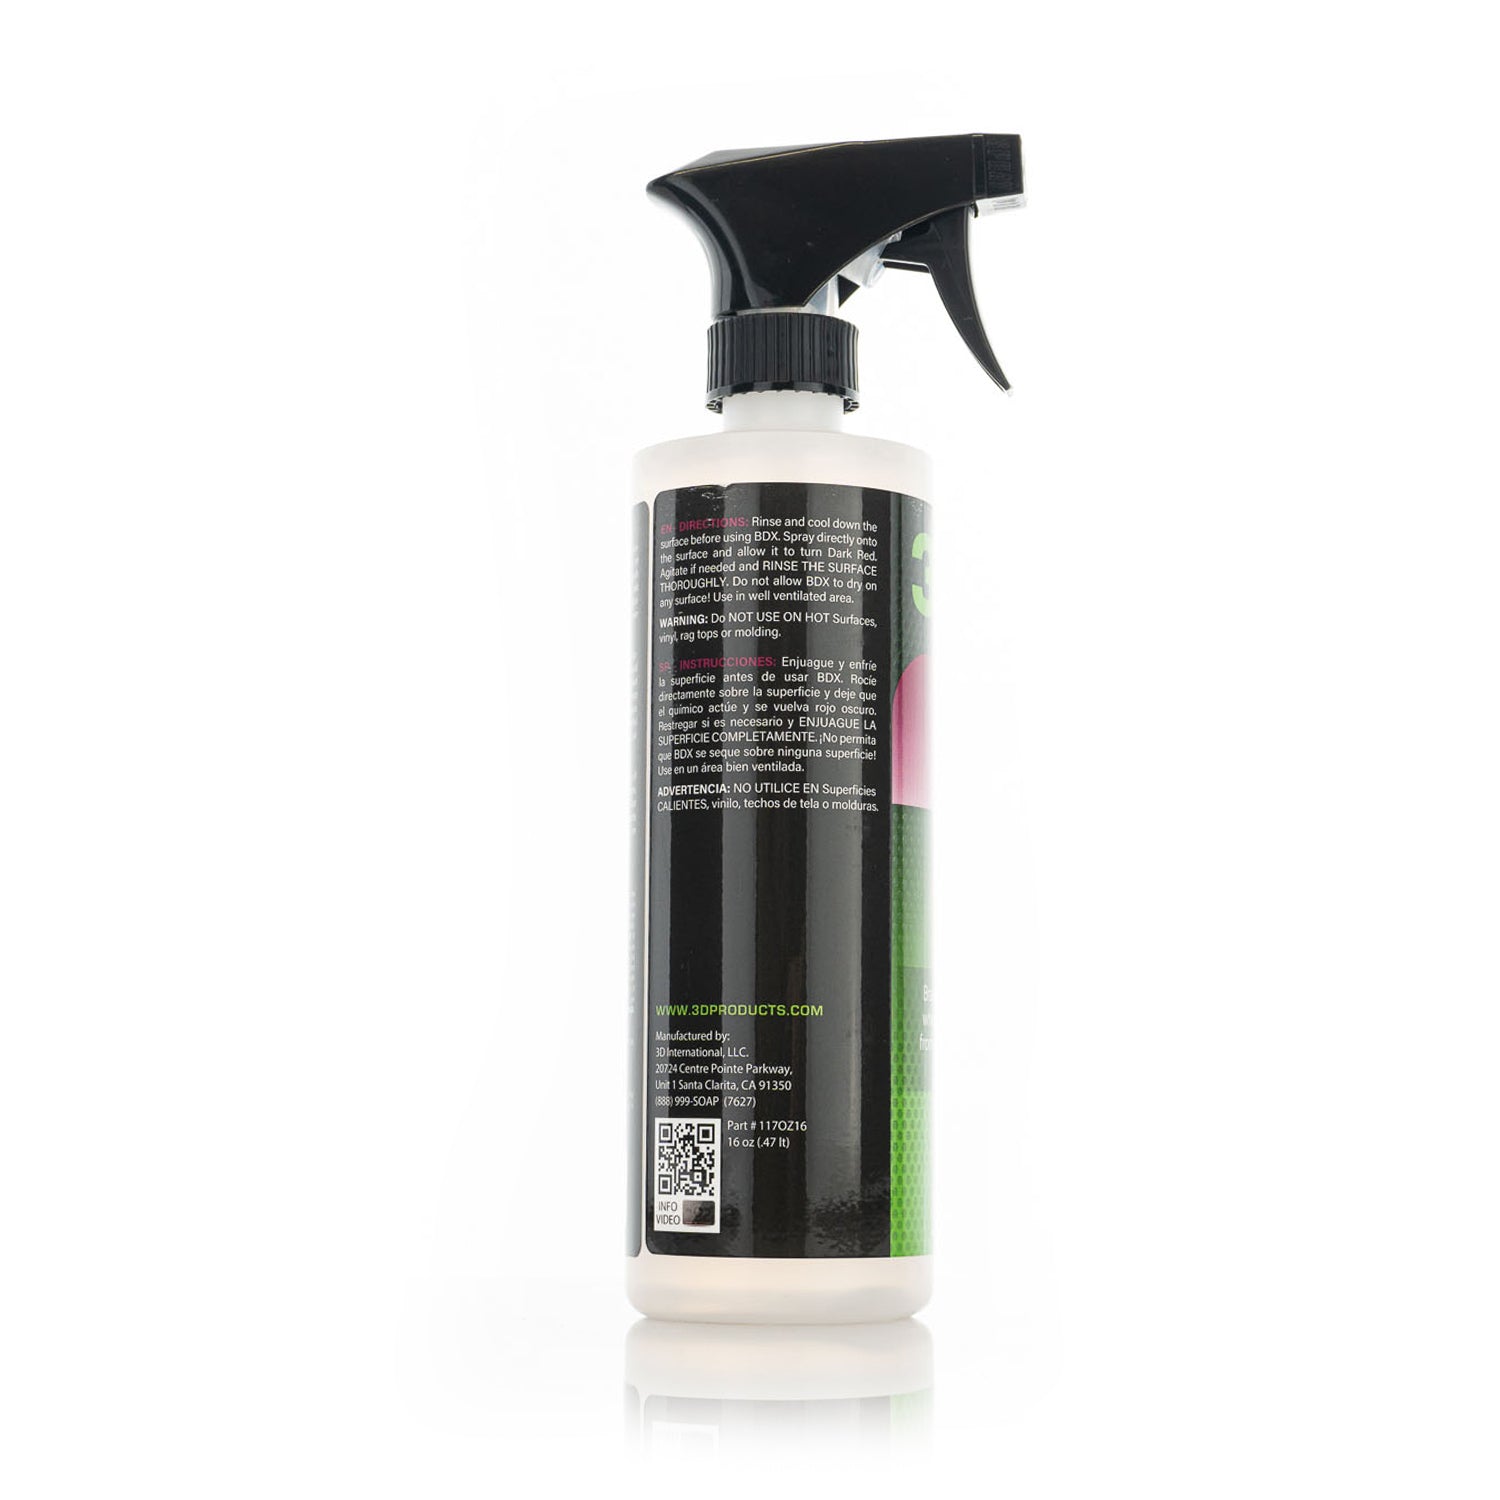 bdx-iron-remover-and-wheel-cleaner-side